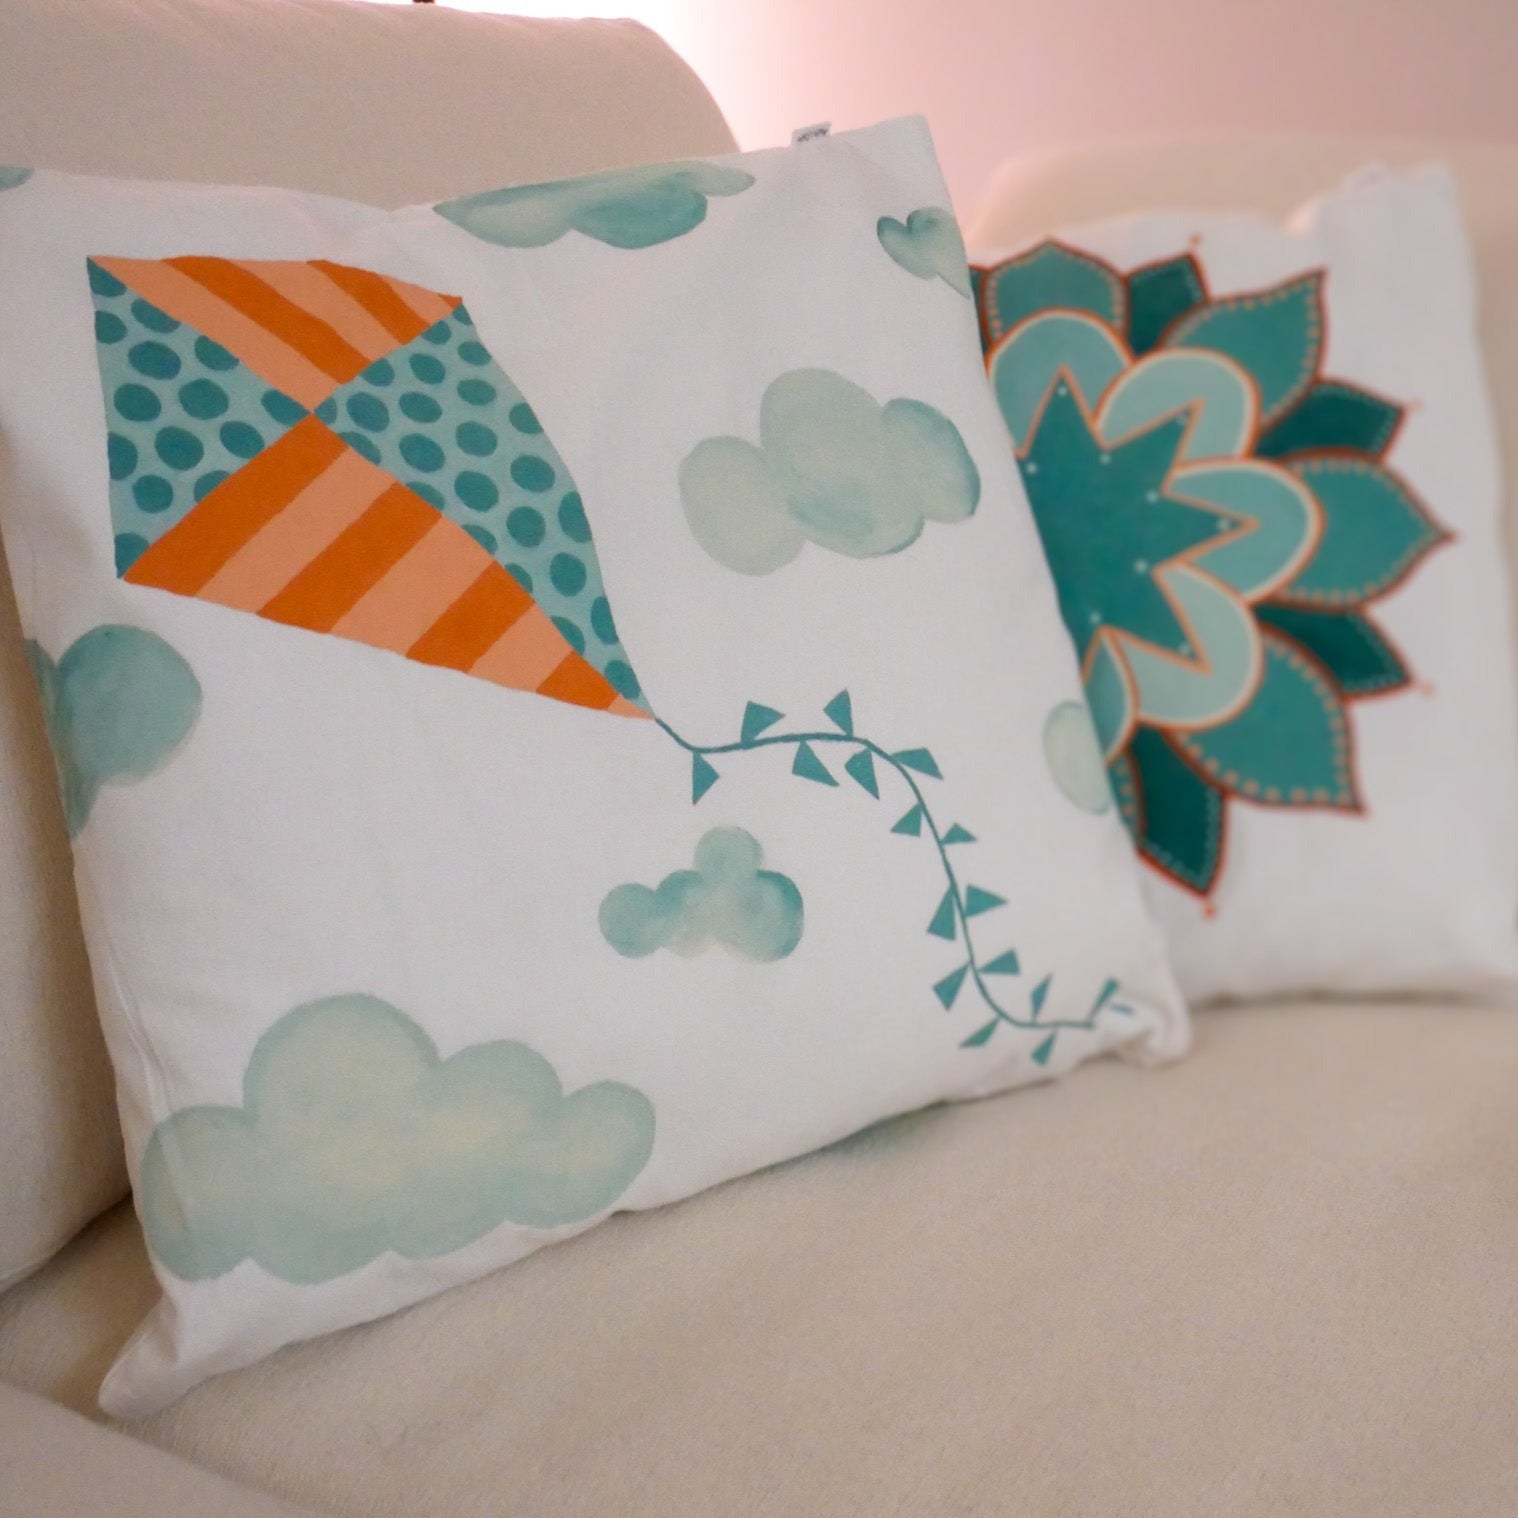 Painted Throw Pillows Family Style Craft Pack